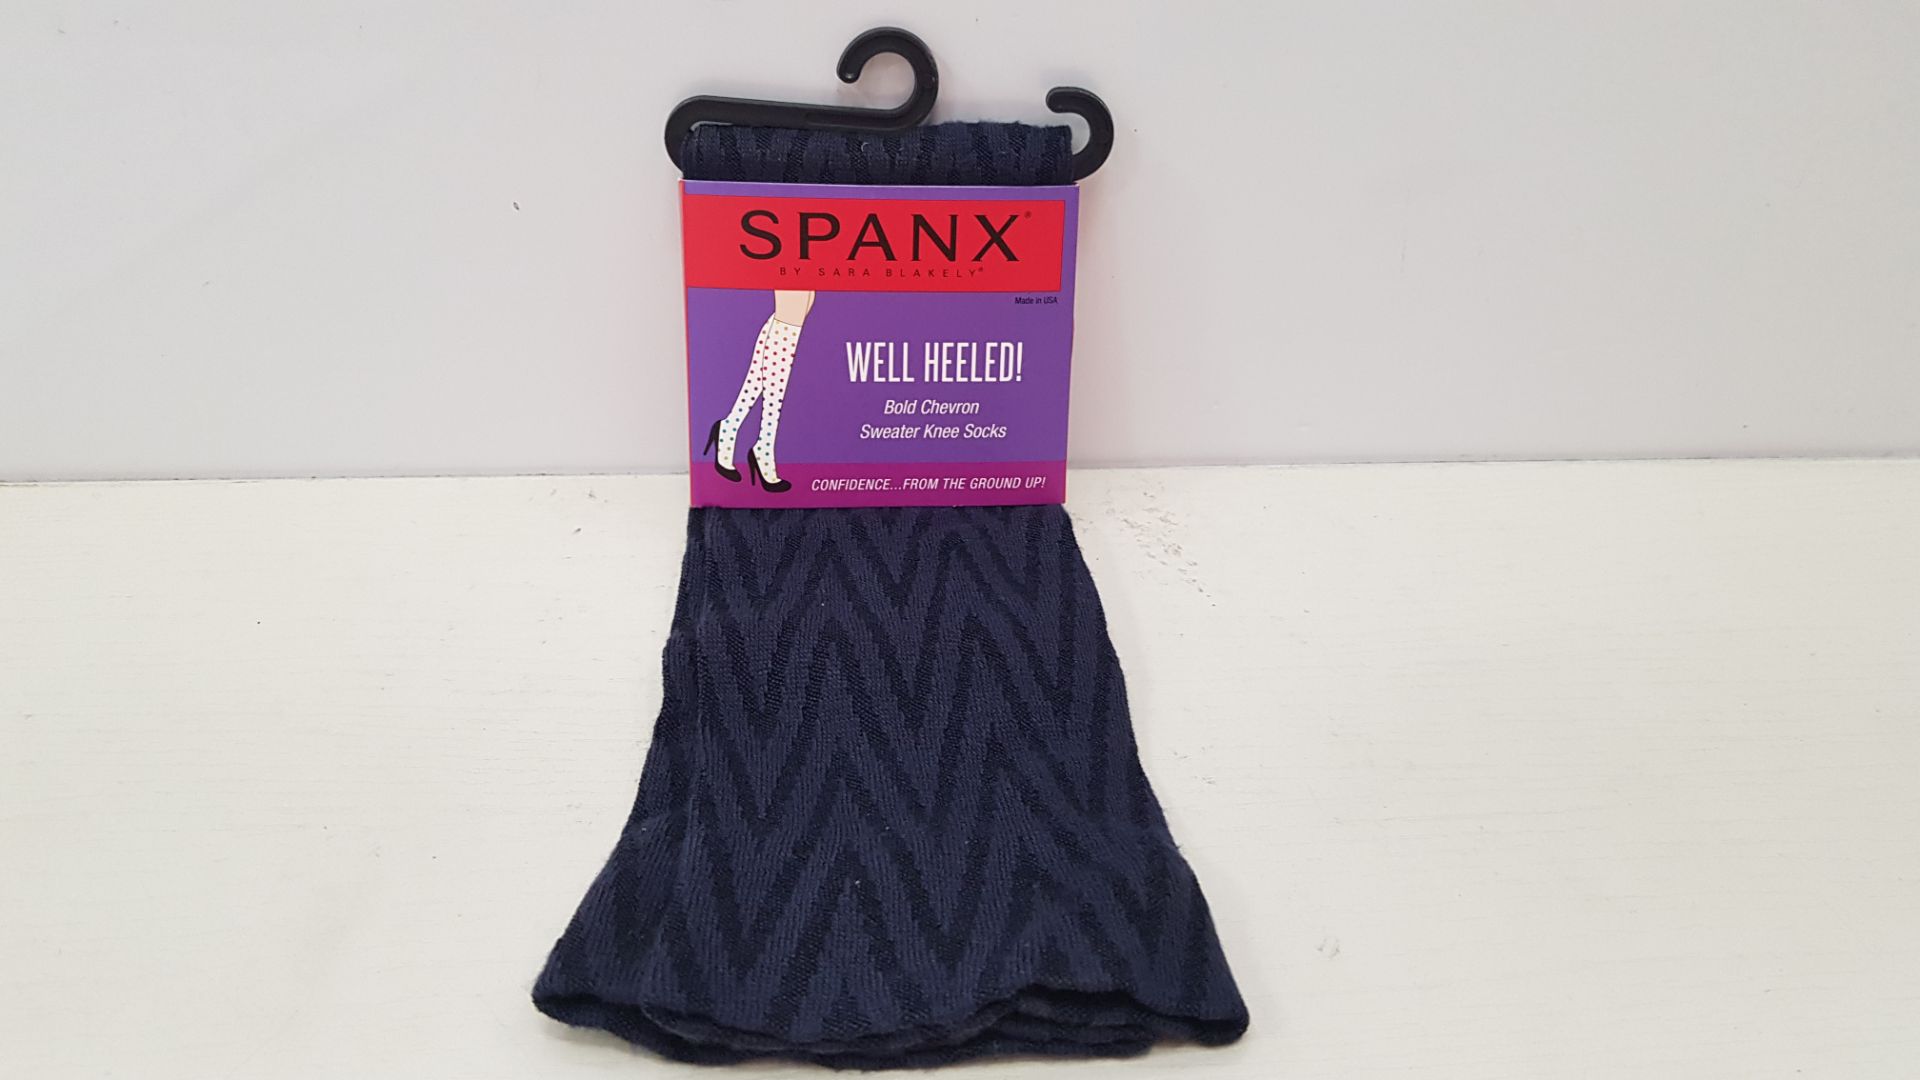 32 X BRAND NEW SPANX WELL HEELED SWEATER KNEE SOCKS IN HEATHER NAVY SIZE REGULAR RRP $18.00 (TOTAL